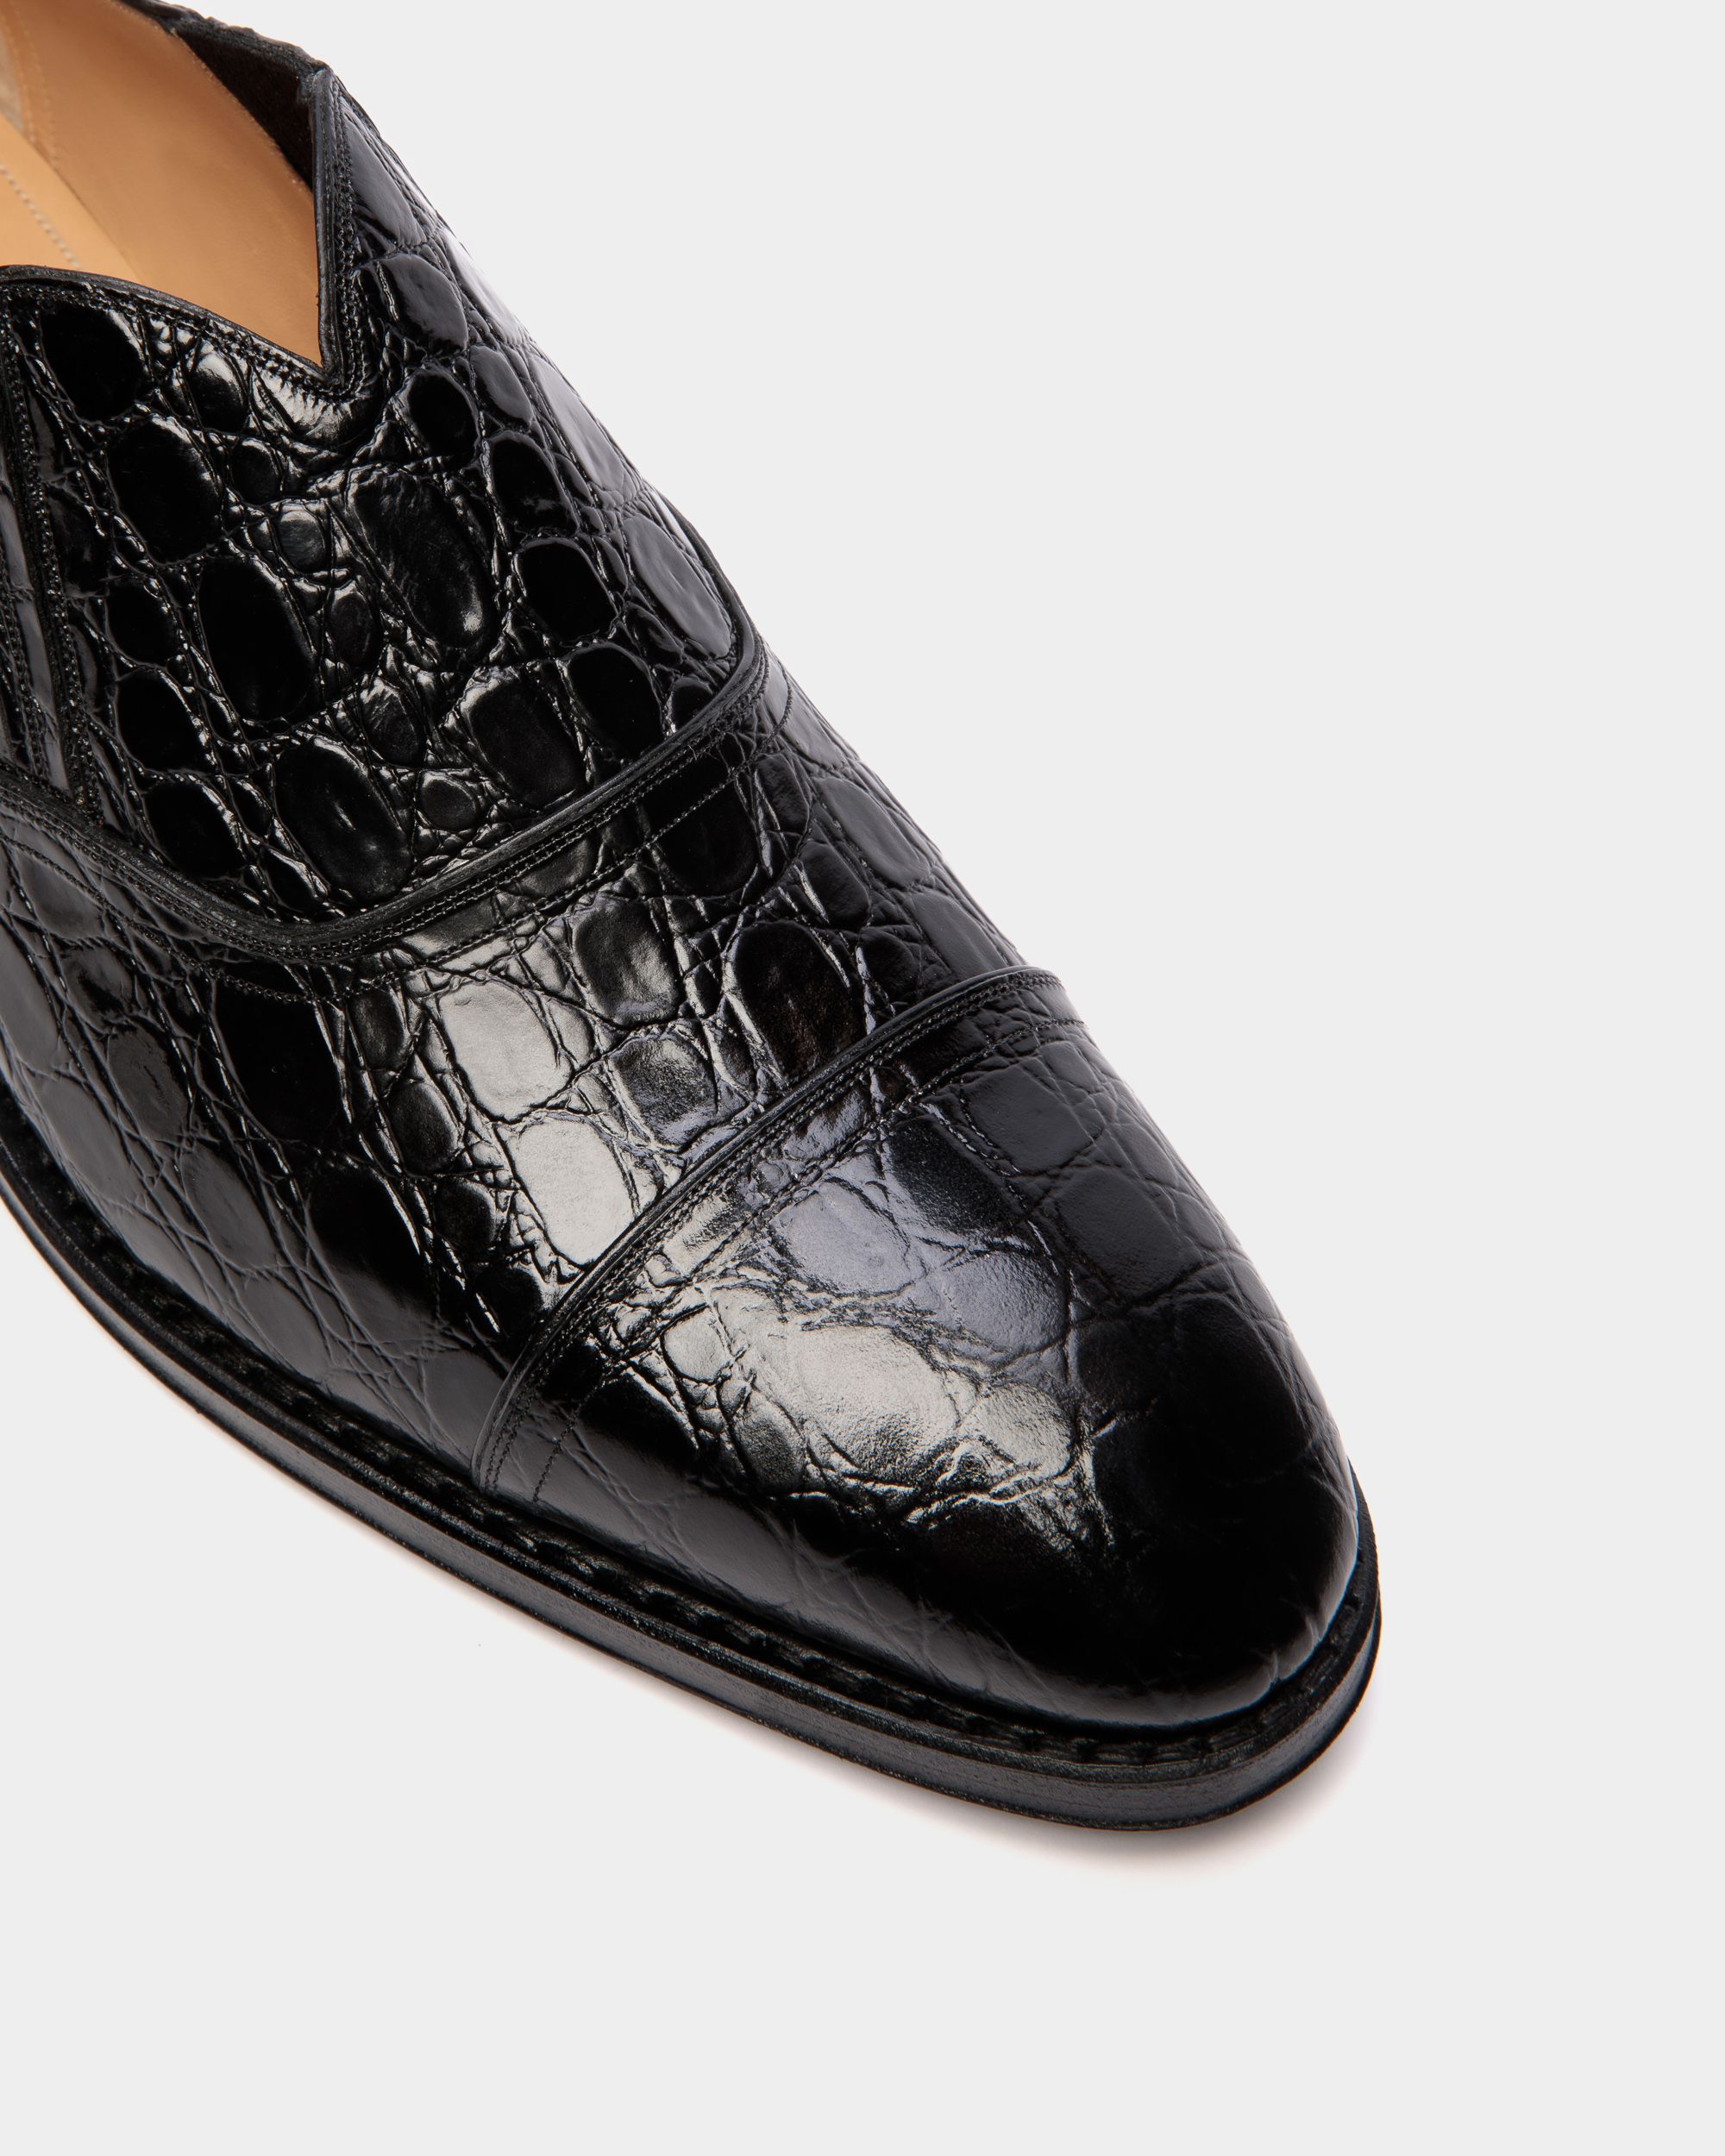 Scribe | Men's Loafer in Black Printed Leather | Bally | Still Life Detail